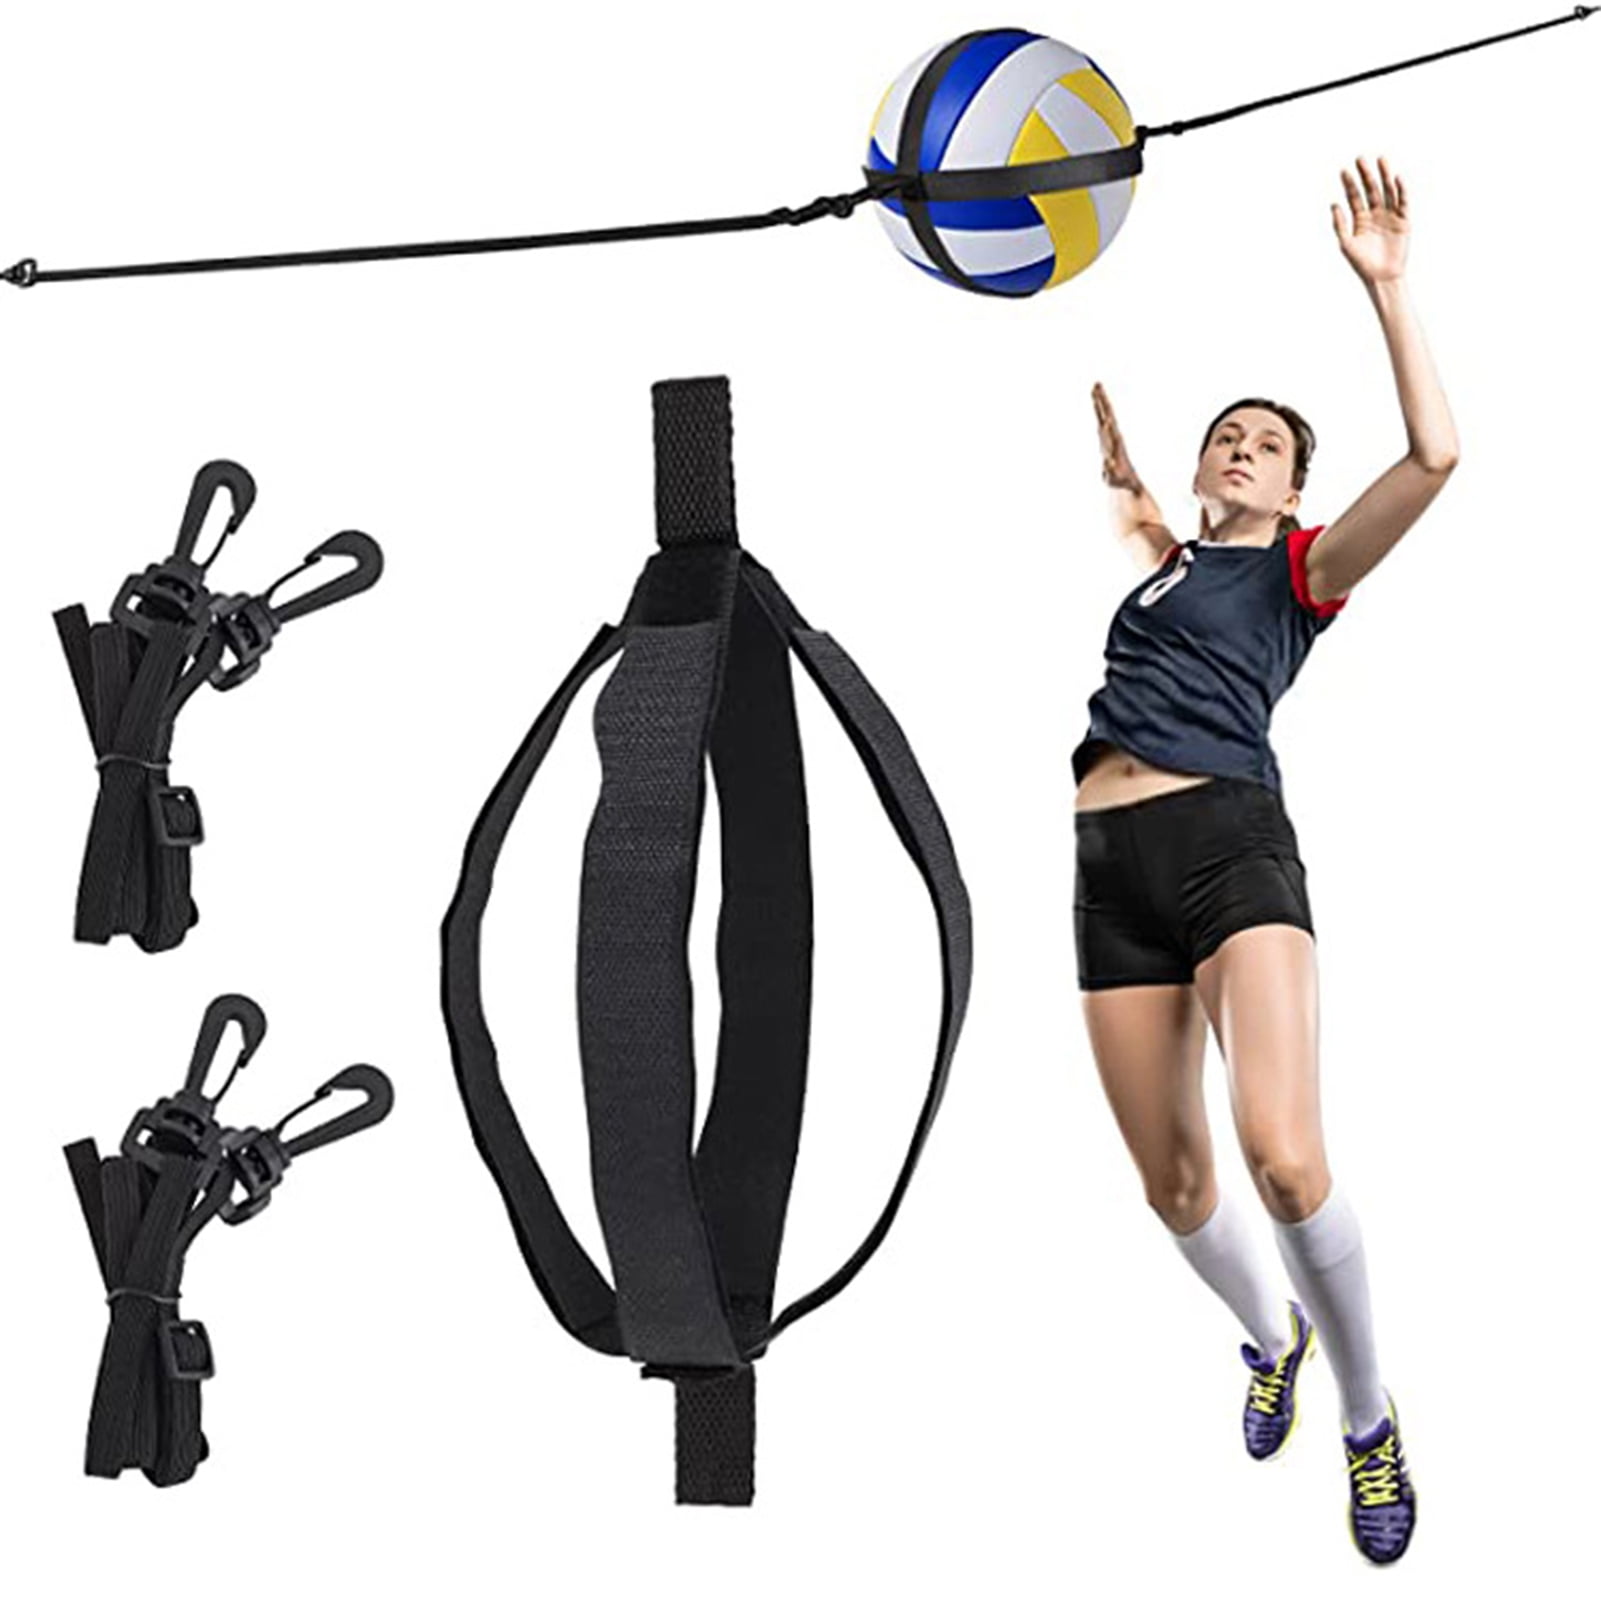 Volleyball Belt Adjustable Wear-resistant Assistant Excellent for Volleyball 